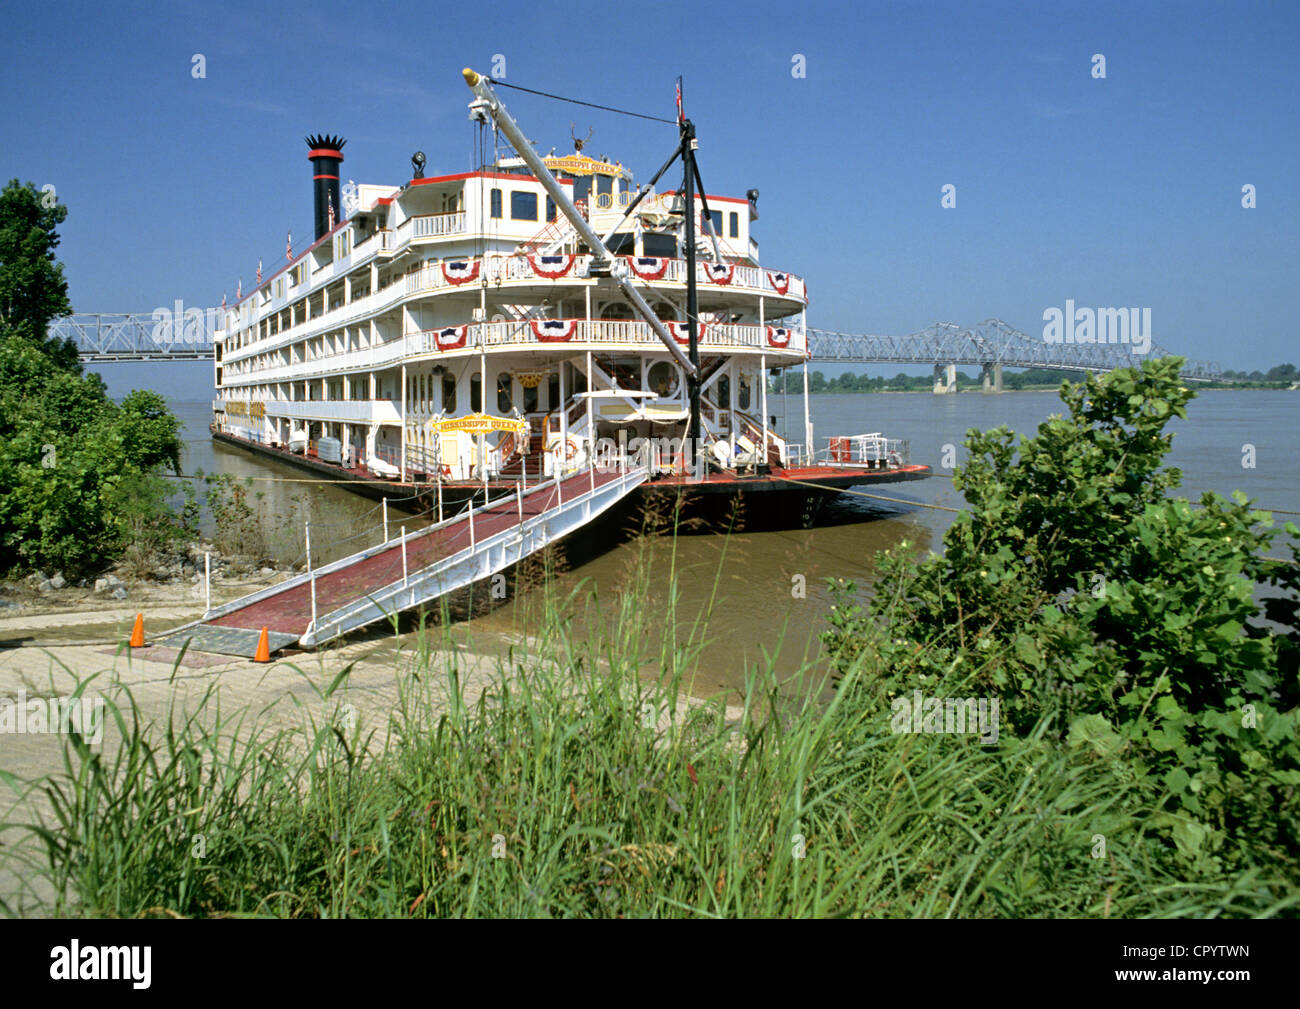 https://c8.alamy.com/comp/CPYTWN/united-states-louisiana-the-mississippi-queen-paddle-boat-on-mississippi-CPYTWN.jpg